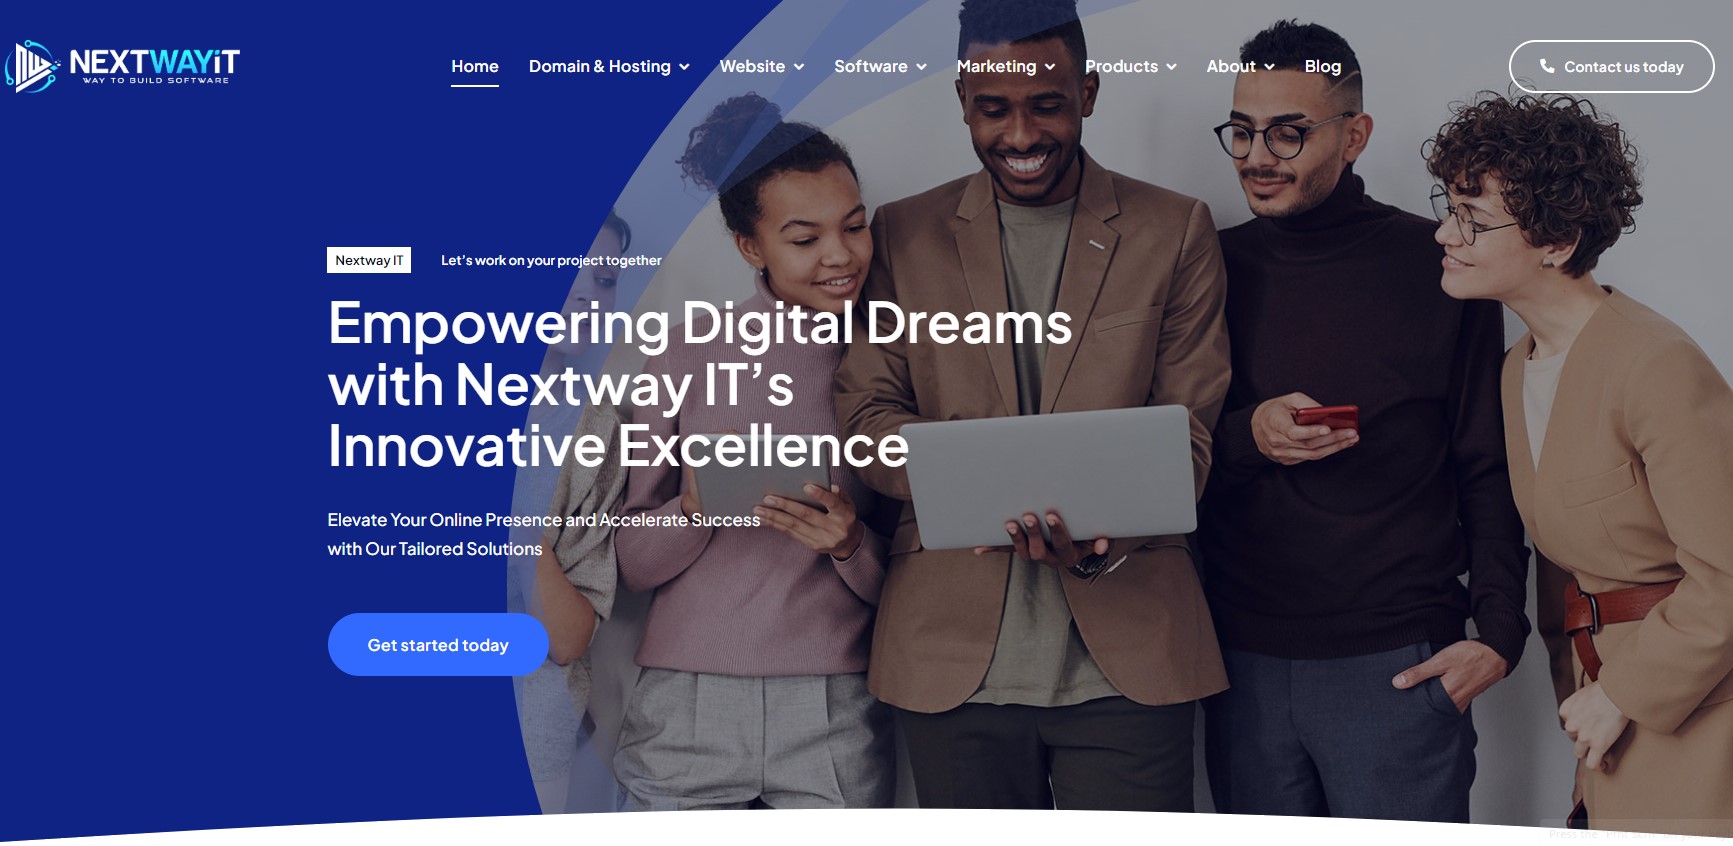 Nextwayit software development company made by skilled people